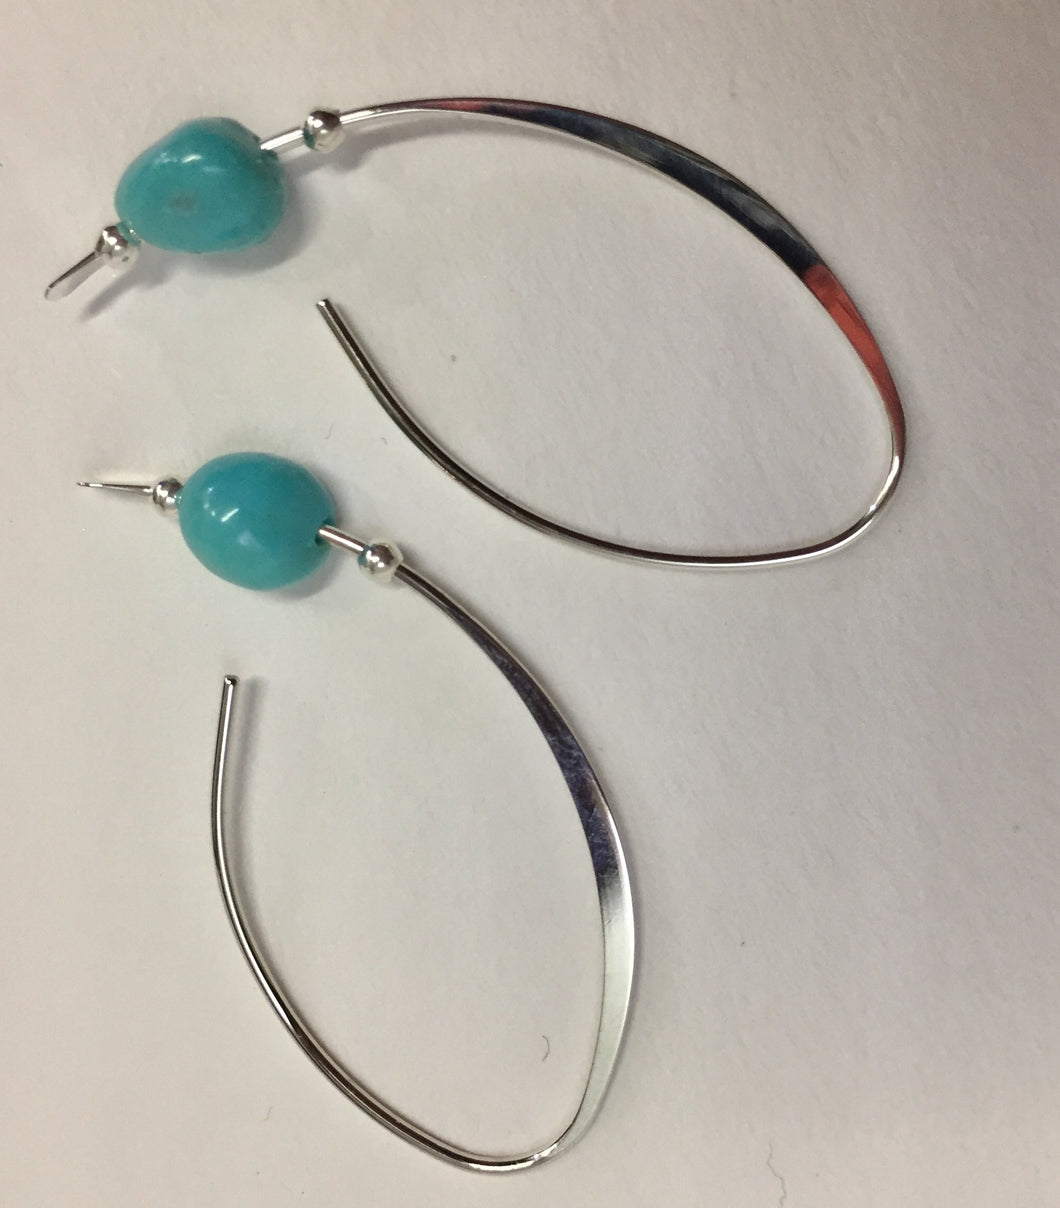 Earrings Silver Curve With Turquoise Bead